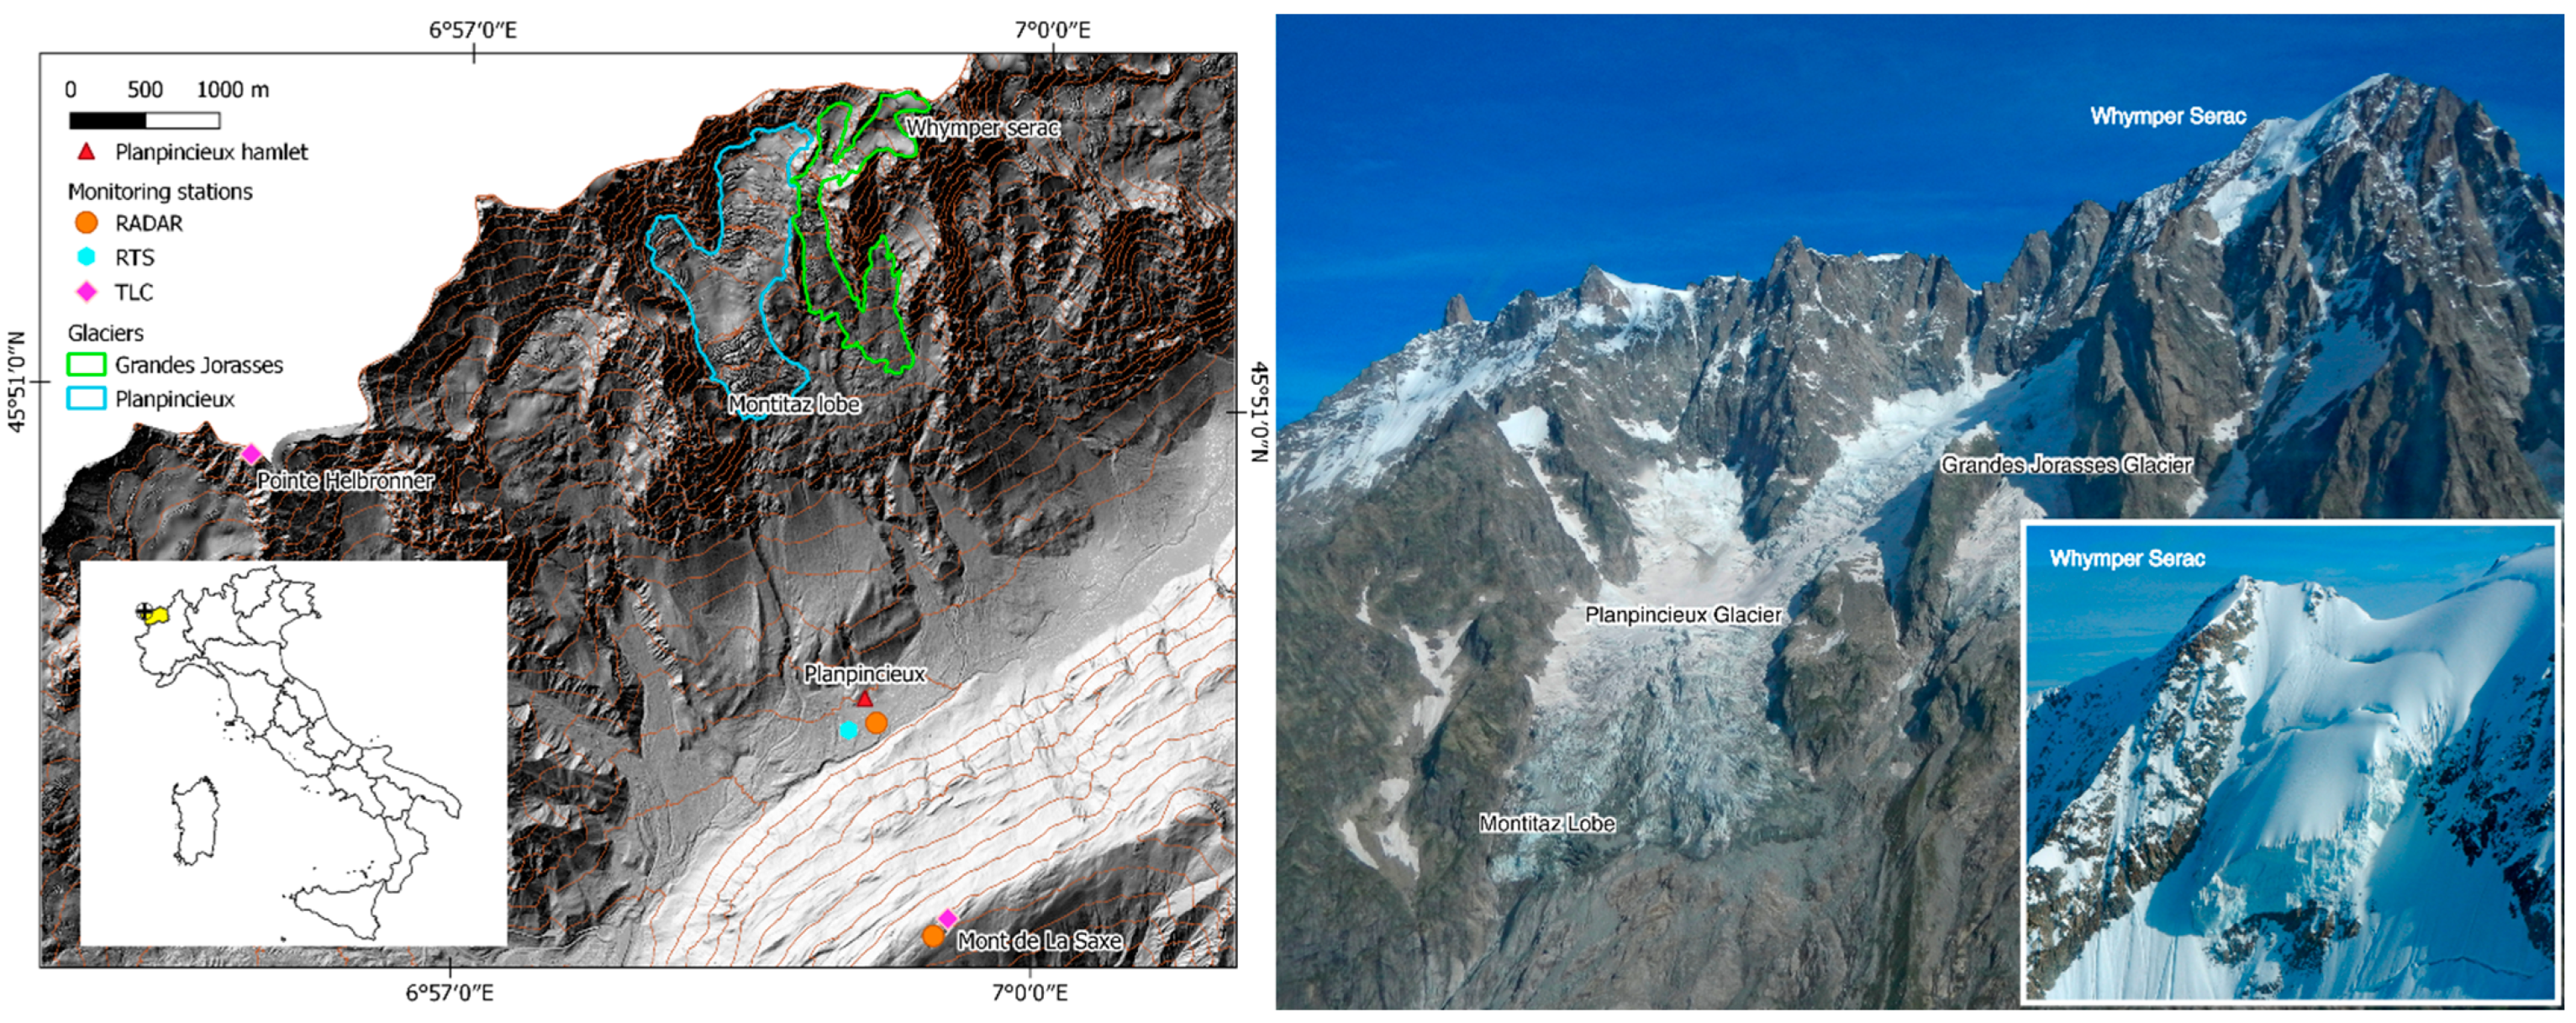 Remote Sensing Free Full-text Ten-year Monitoring Of The Grandes Jorasses Glaciers Kinematics Limits Potentialities And Possible Applications Of Different Monitoring Systems Html